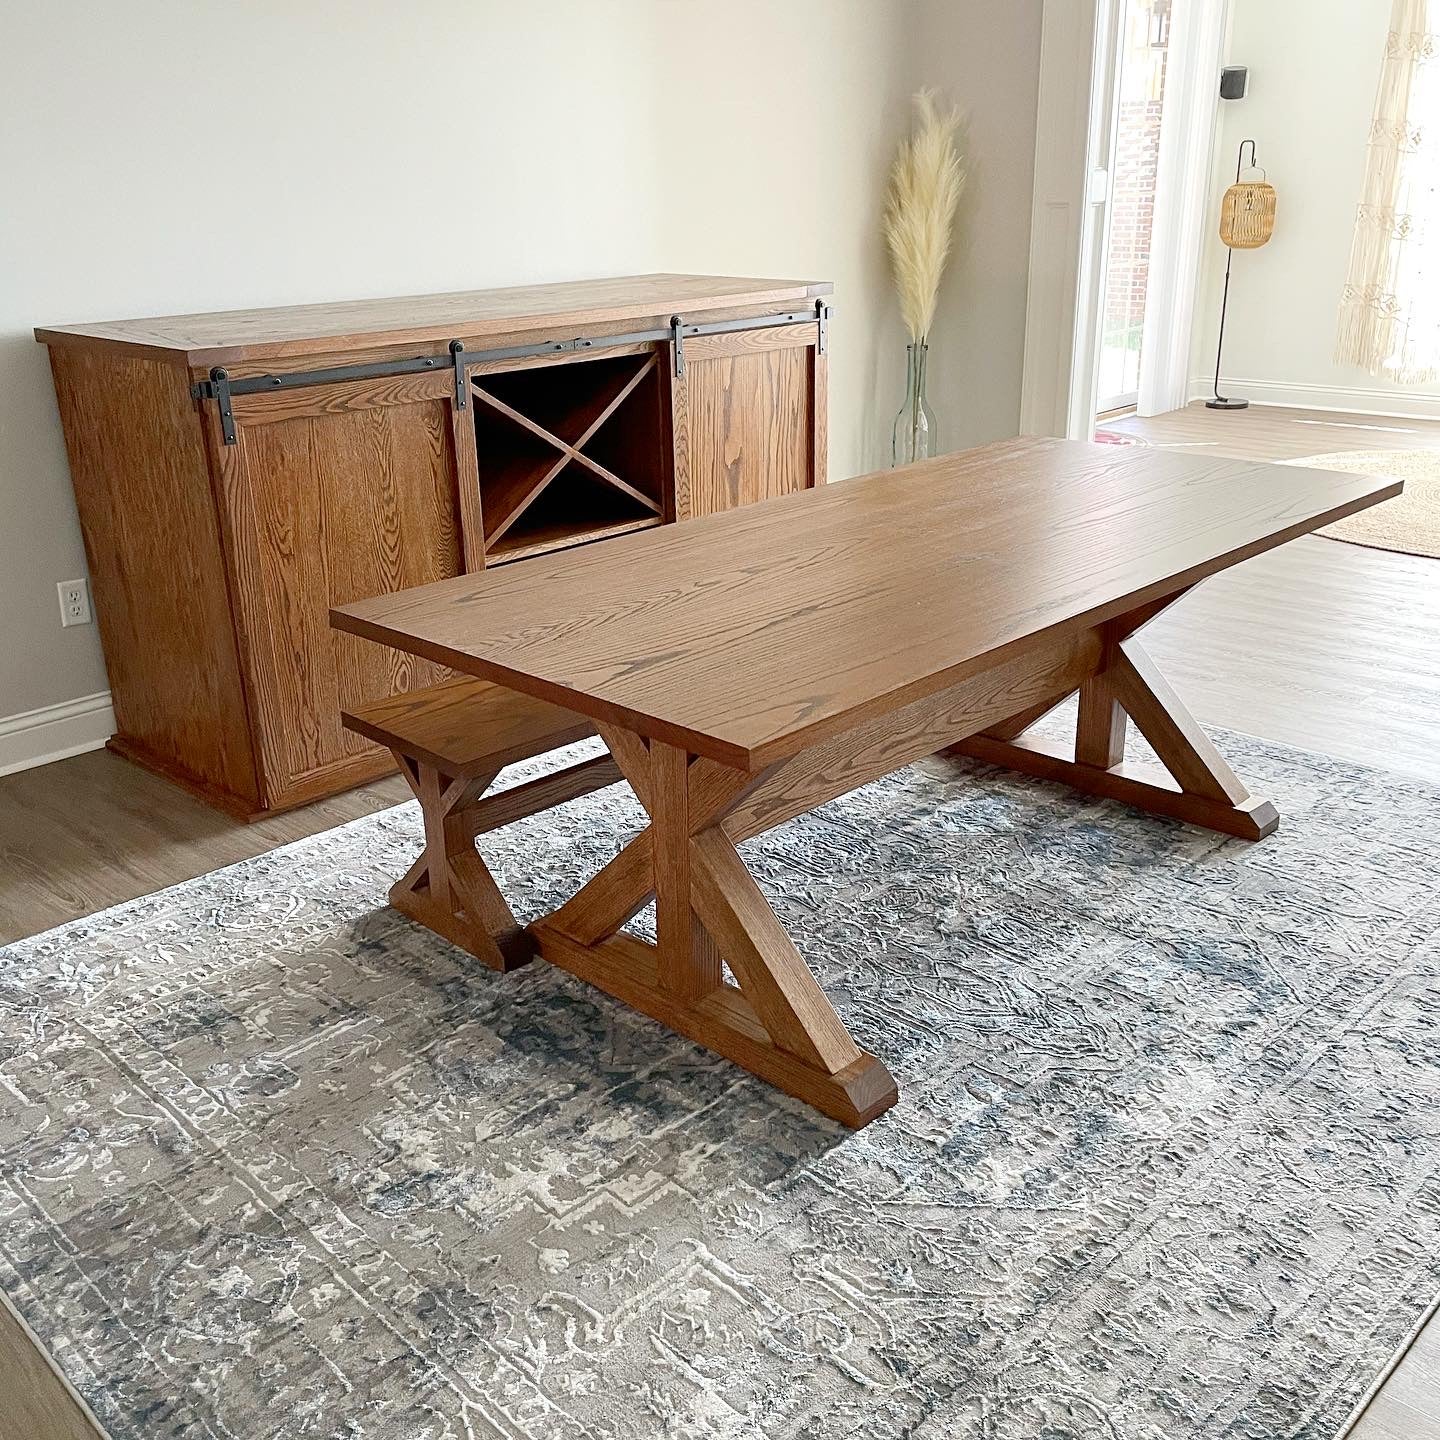 Pictured with a 7' L x 42" W Red Oak table stained Honey. Pictured with a Matching Bench. Pictured with a 6' L x 34.5" T x 20" D Solid Red Oak Sliding Barn Door Console with two X's for wine rack storage .